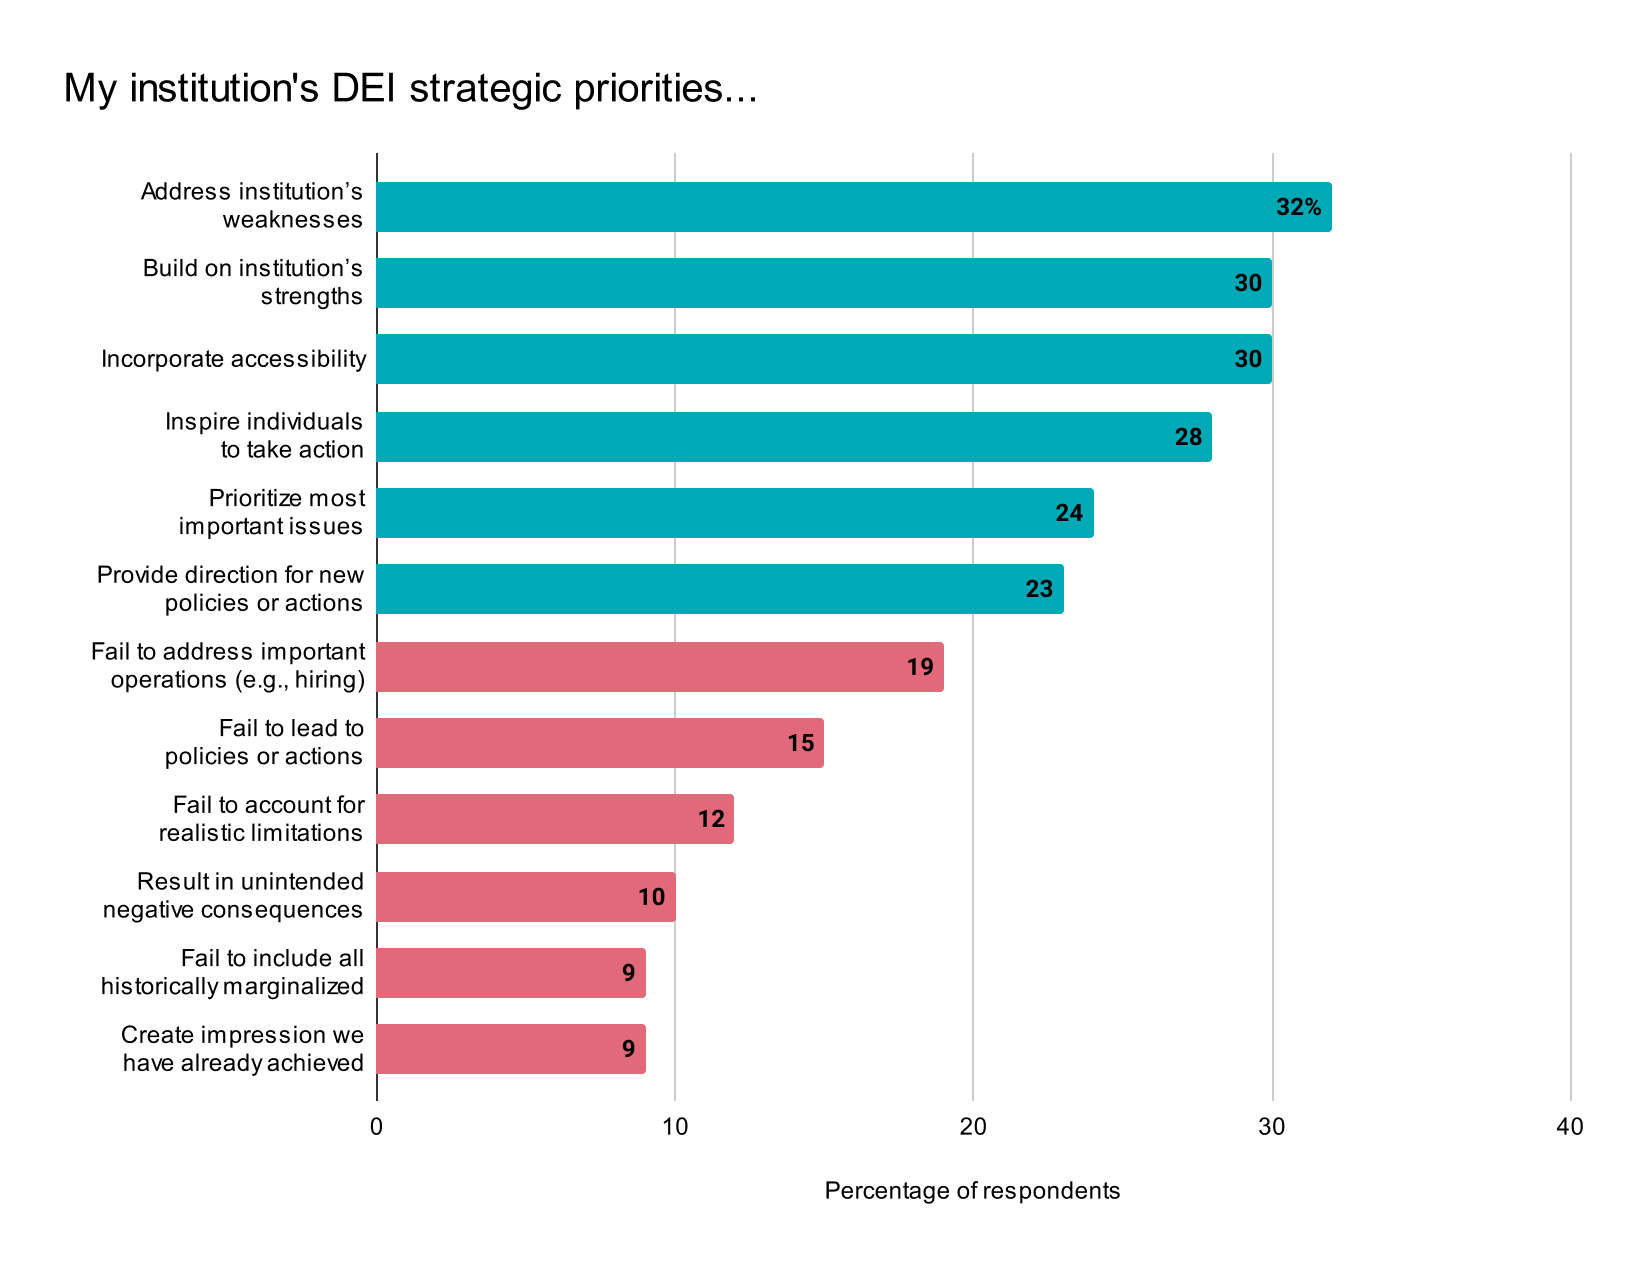 bar graph showing Practical Outcomes of DEI Aspects of Institutional Strategic Plans. Address insitution's weaknesses 32%; Build on institution's strengths 30%; Incorporate accessibility 30%; Inspire individuals to take action 28%; Prioritize most important issues 24%; provide direction for new policies or actions 23%; fail to address important operations (e.g. hiring) 19%; Fail to lead to policies or actions 15%; fail to account for realistic limitations 12%; Result in unintended negative consequences 10%; fail to include all historically marginalized groups 9%; create impression we have already achieved goals 9%;